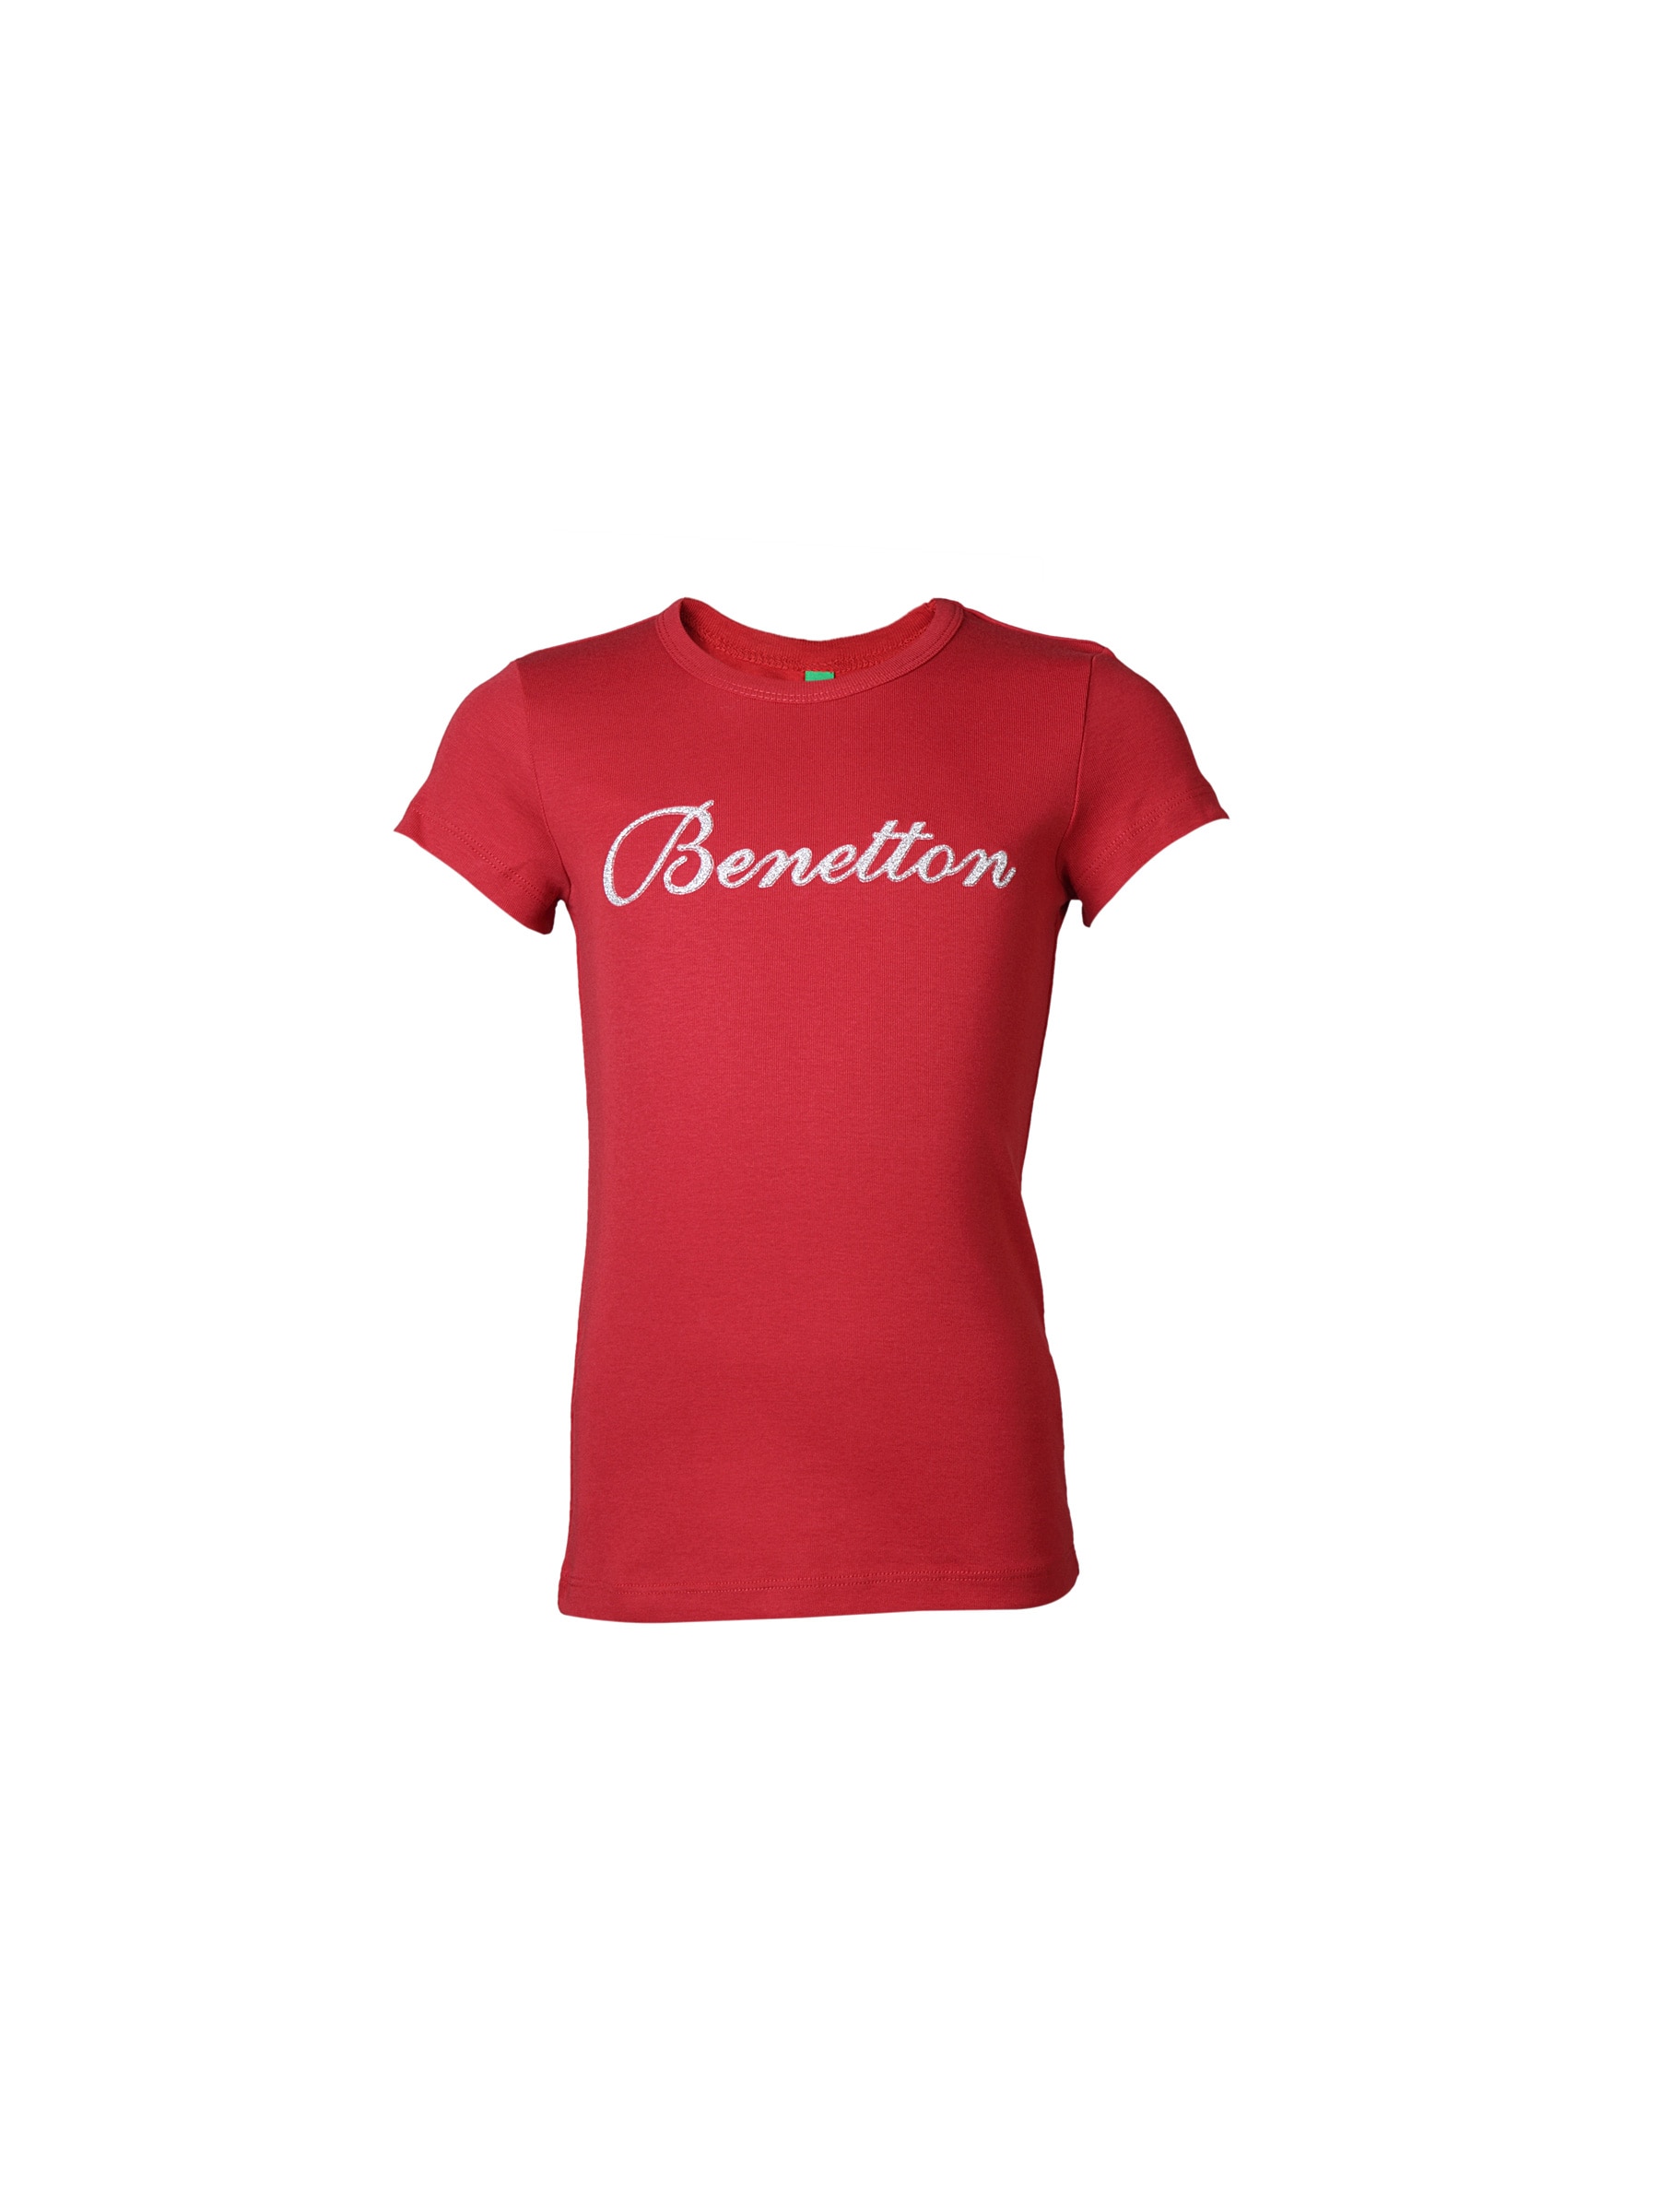 United Colors of Benetton Kids Girls Red Top